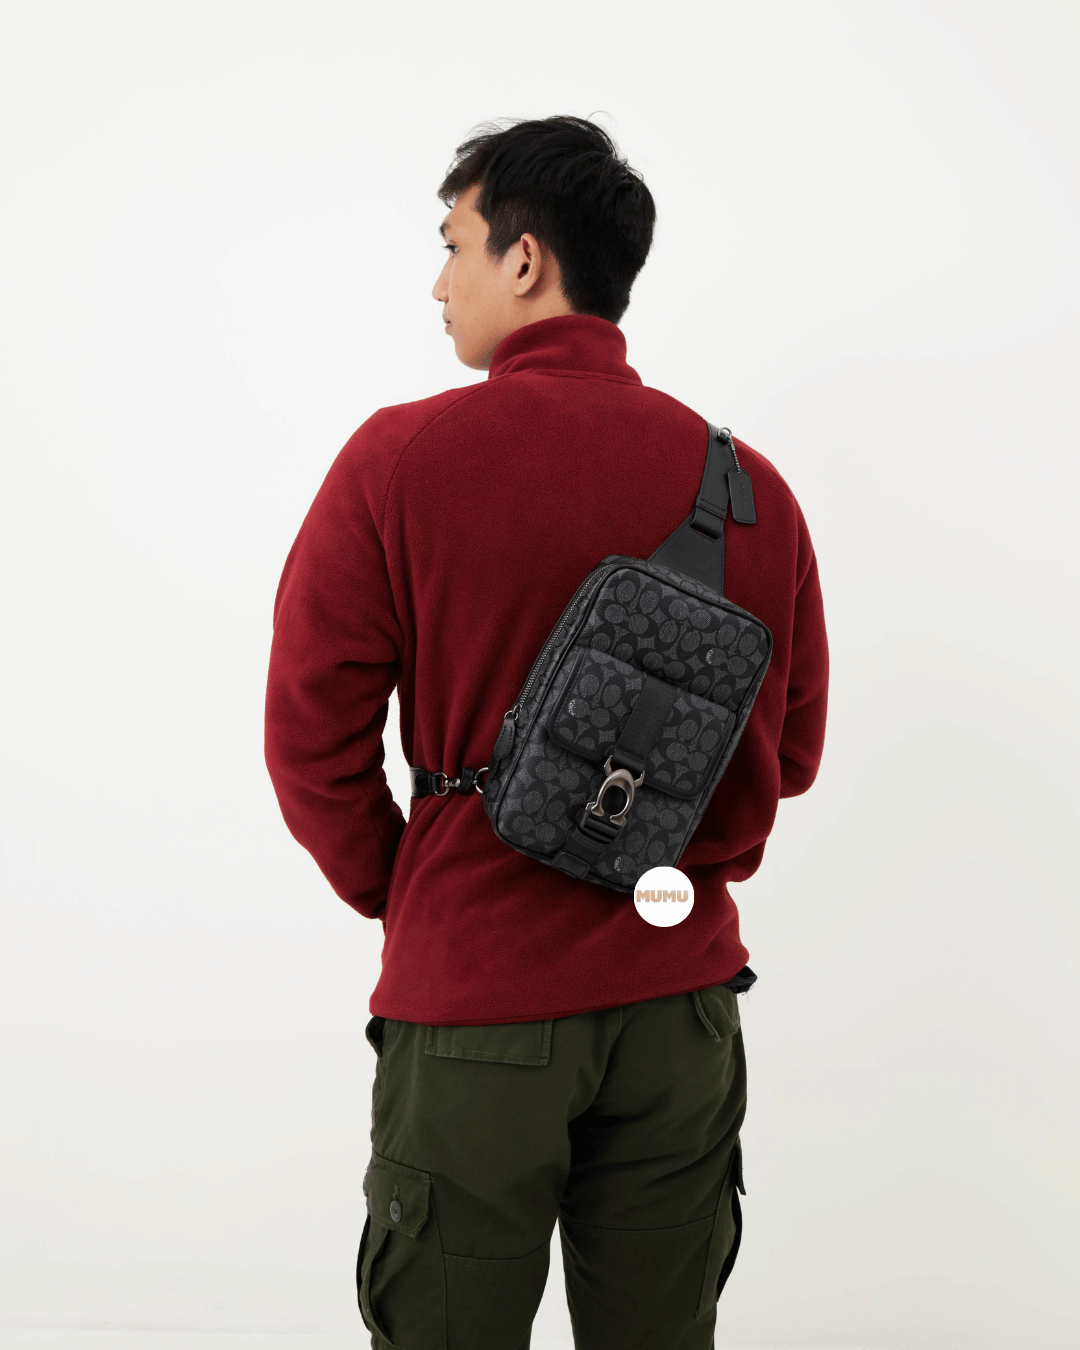 Beck Pack in Signature Canvas Charcoal Black